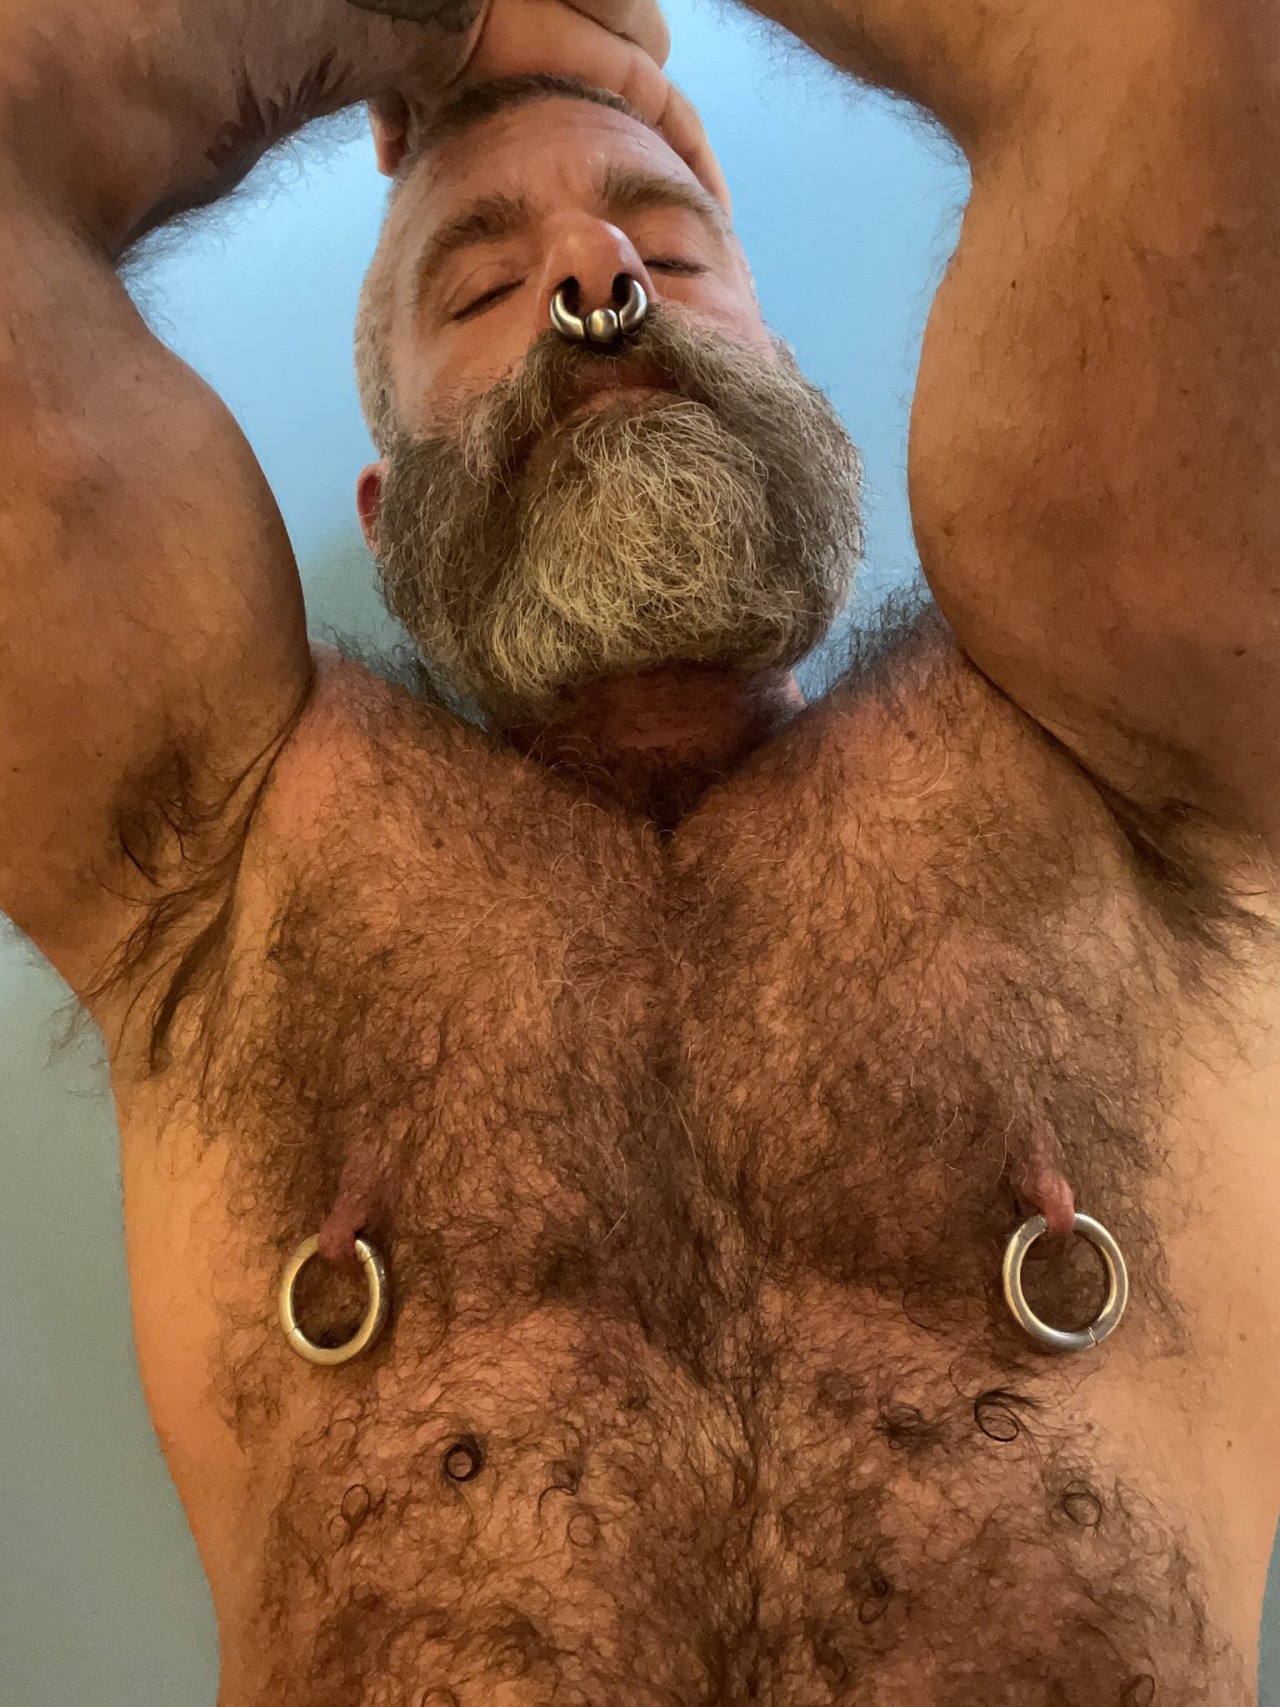 orionbear-ish:justmanlust4:Great rings, Daddy…🤗🐻🤤